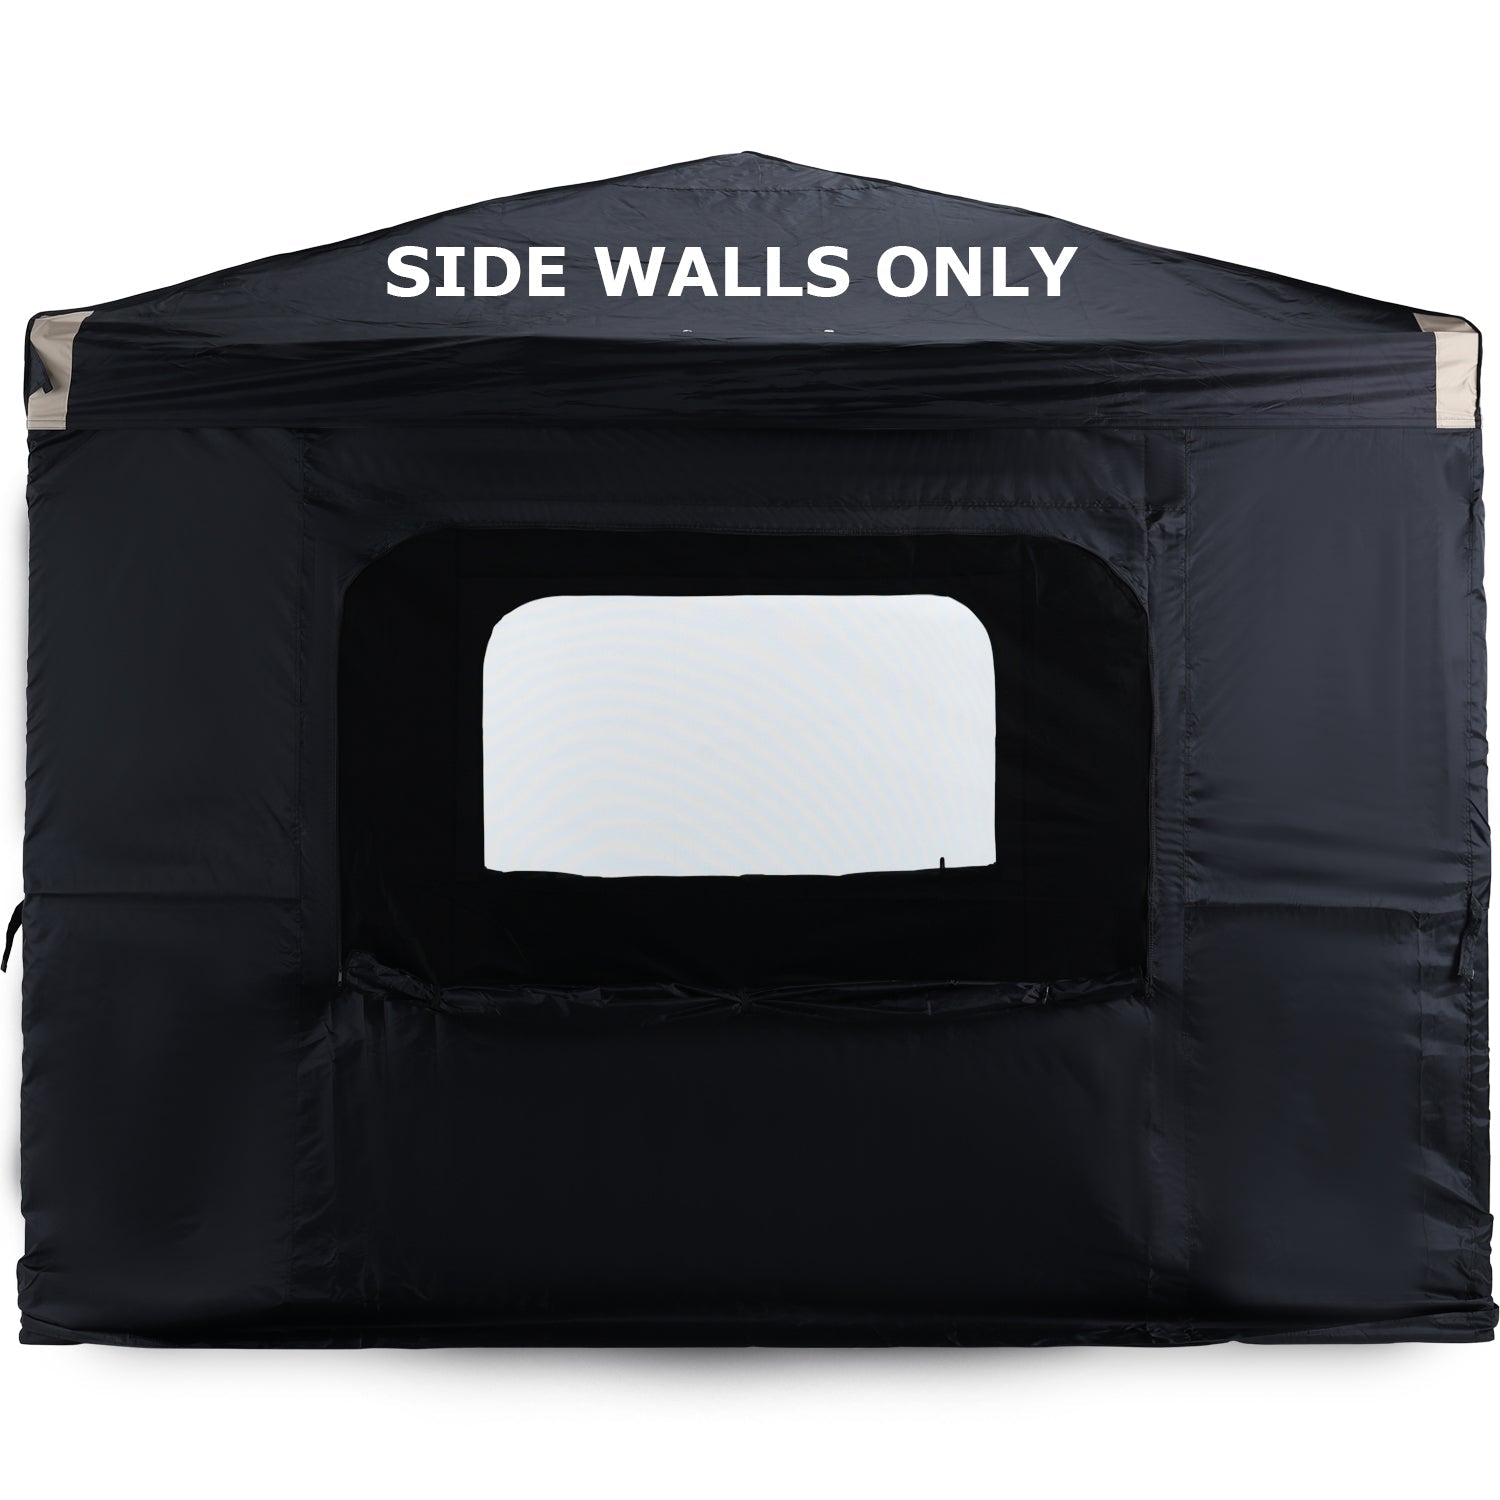 Canopy Sidewall Replacement with 2 Side Zipper and Windows for 10'' x 10'' Pop Up Canopy Tent  (Sidewall Only) Gazebo part Aoodor LLC Black  